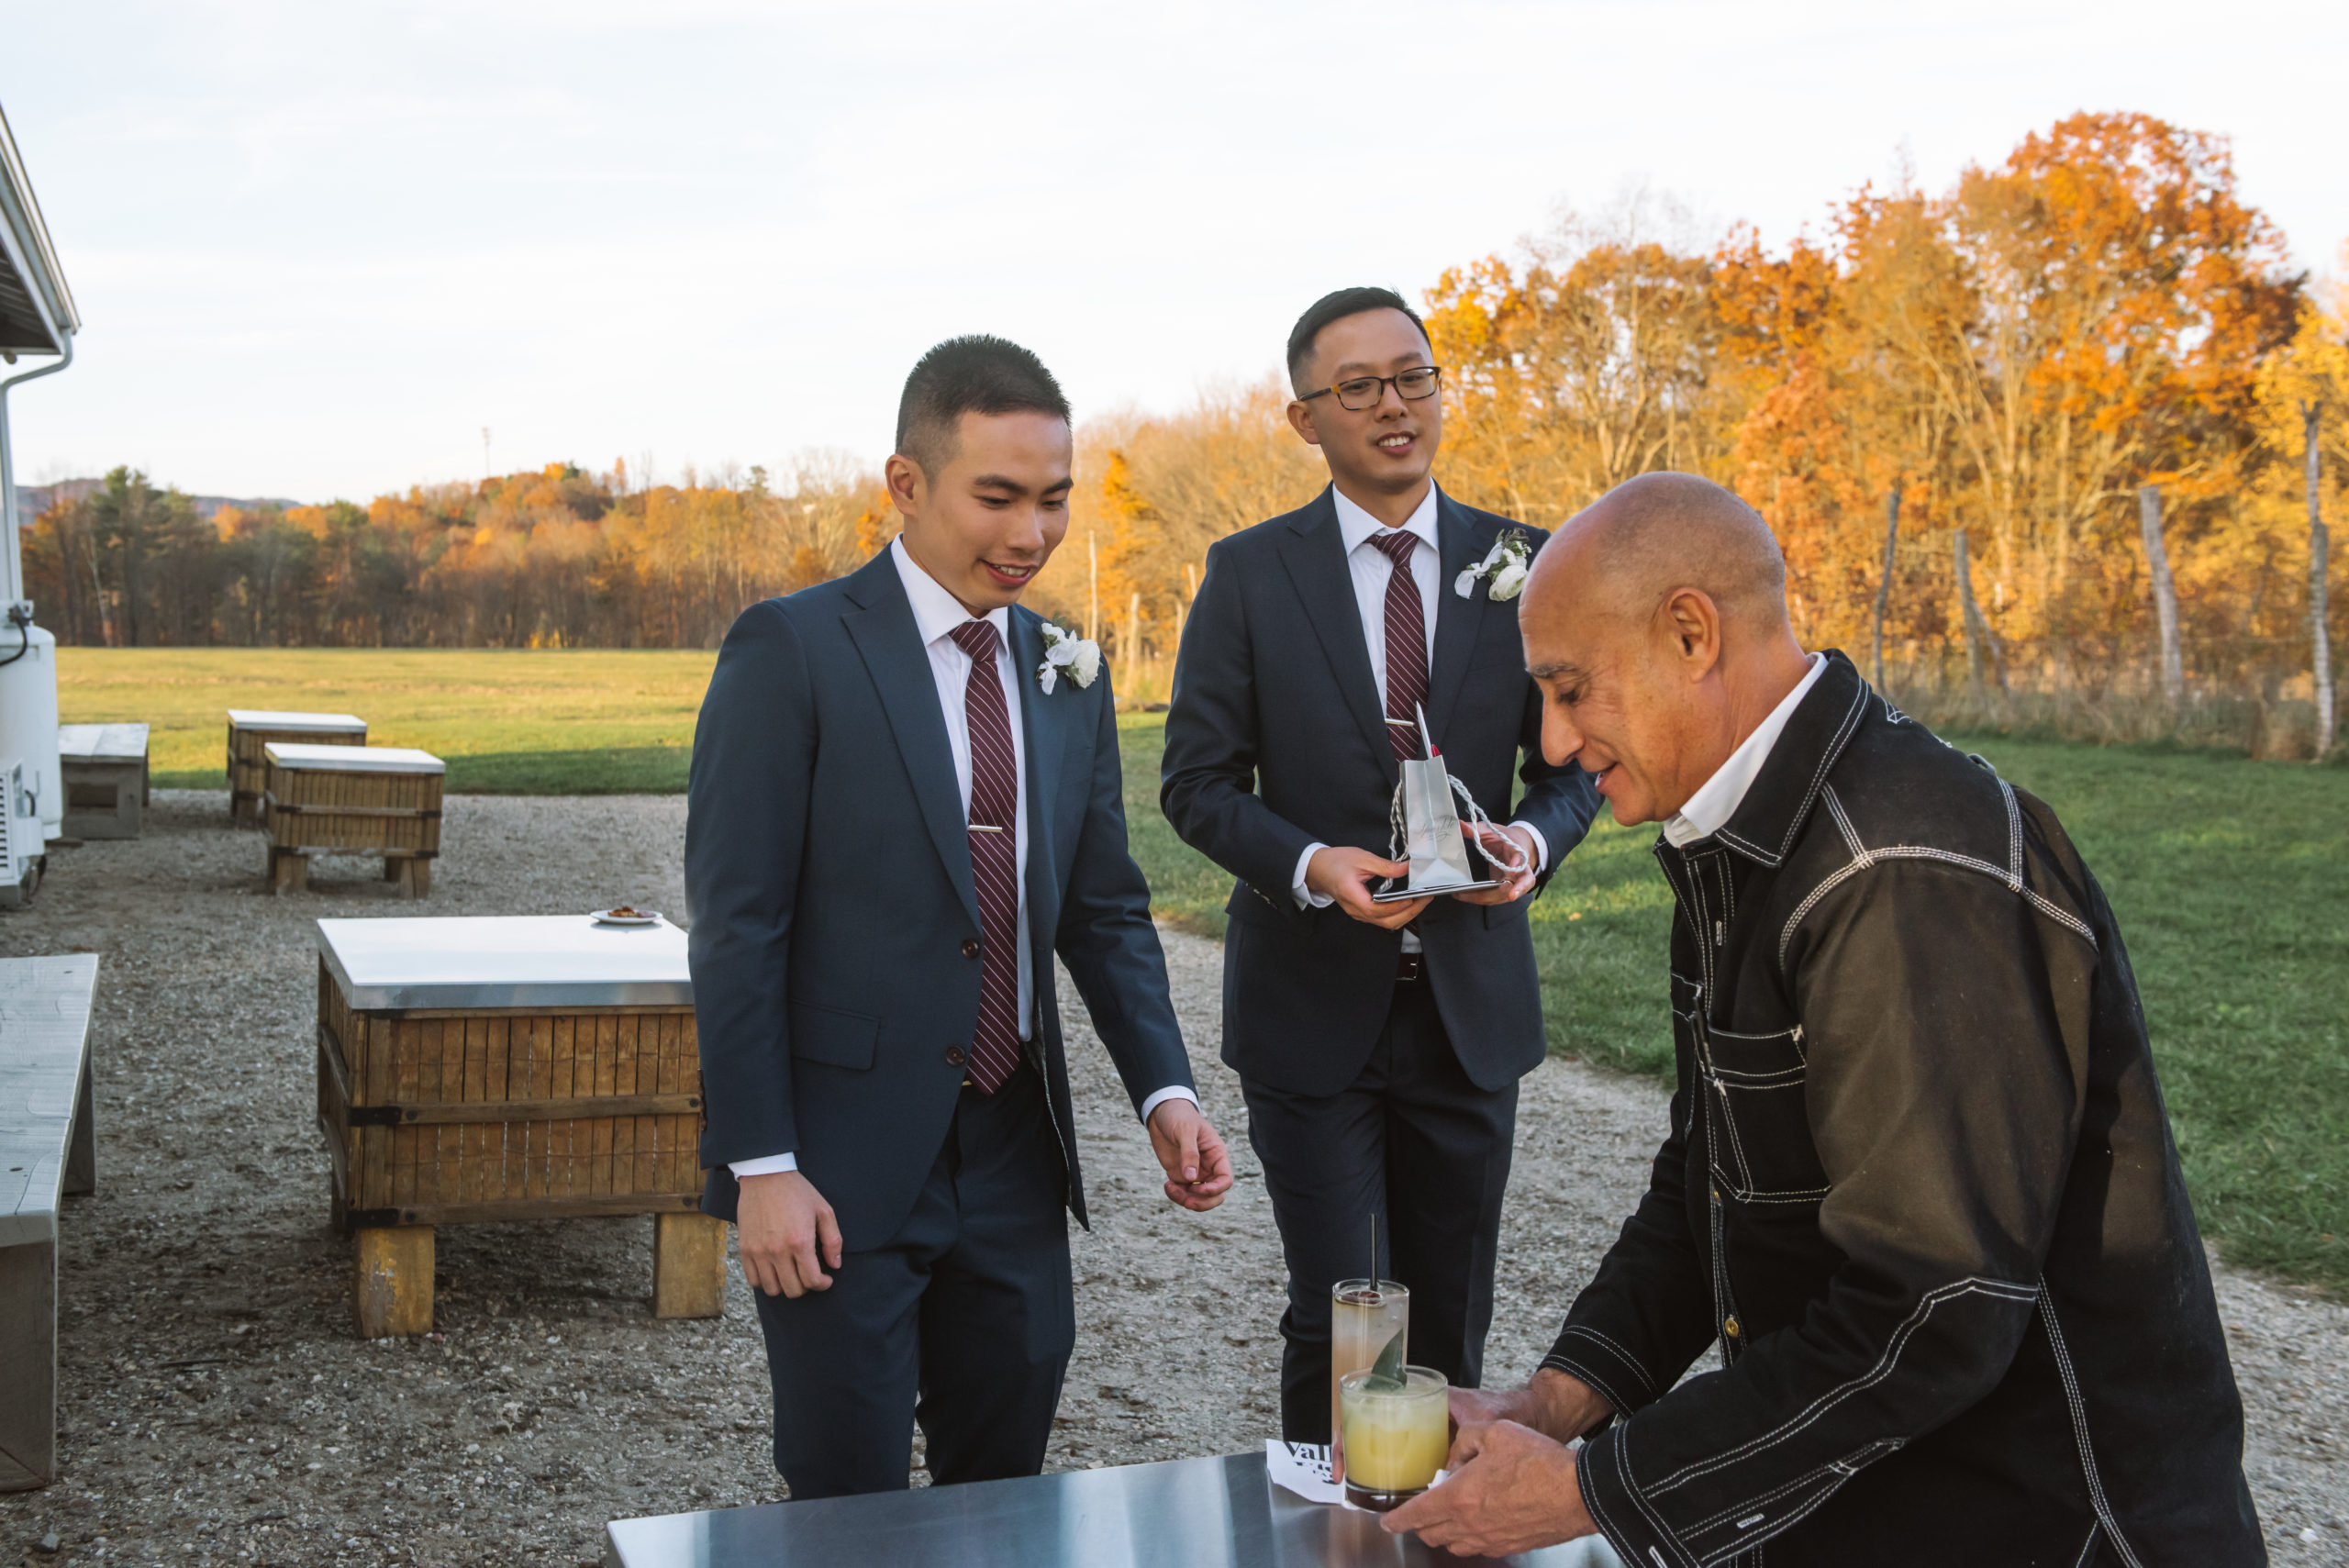 Two grooms about to receive their signature cocktails from their wedding planner.